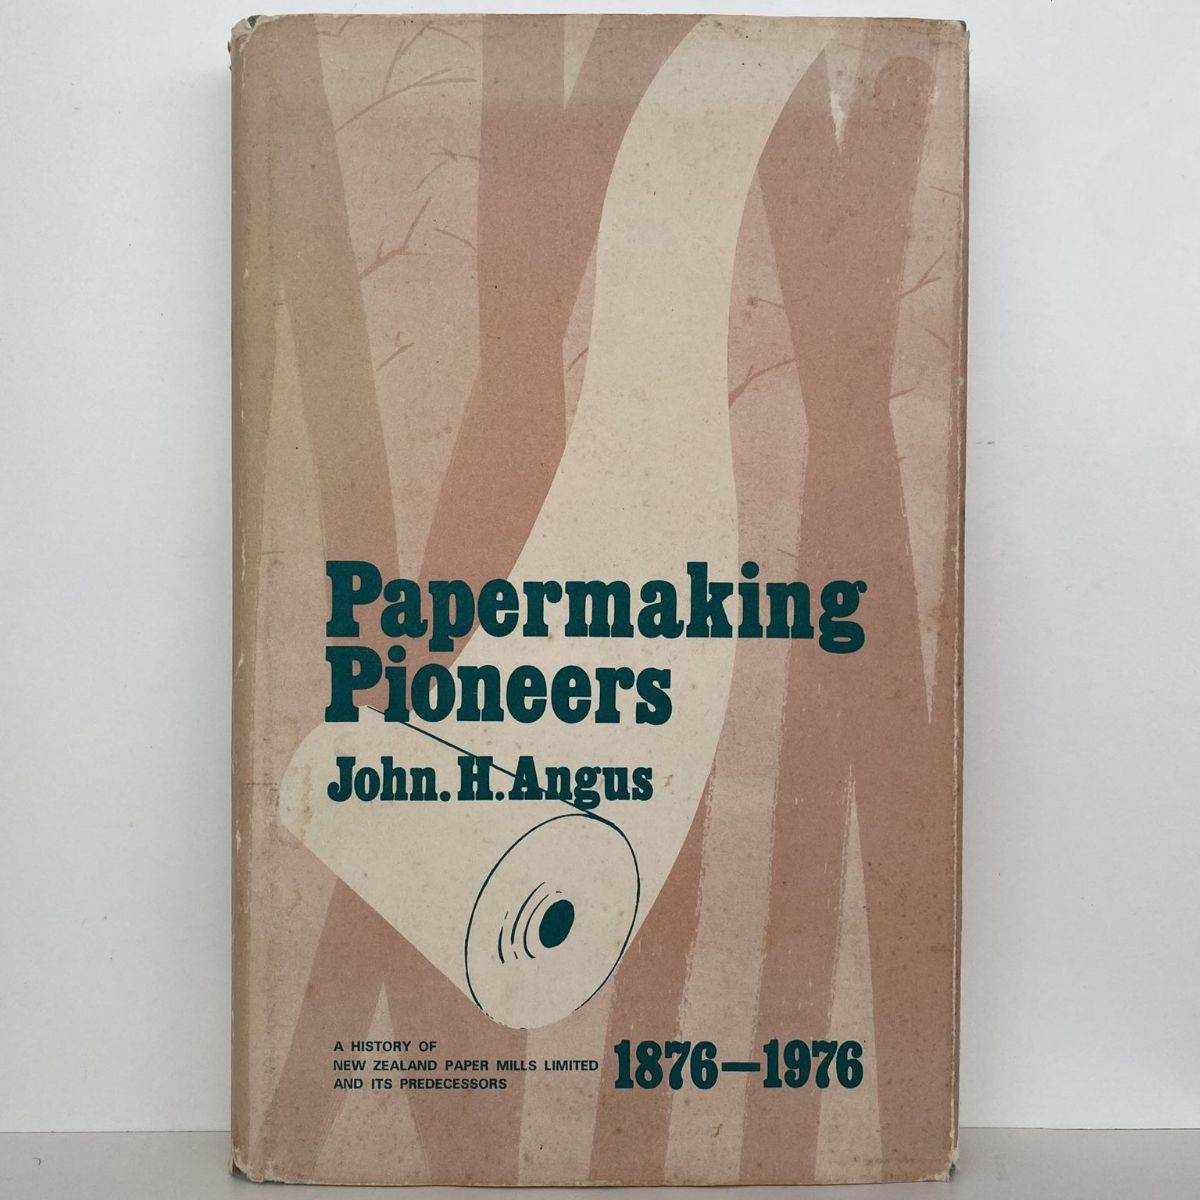 PAPERMAKING PIONEERS: A History of New Zealand Paper Mills 1876-1976